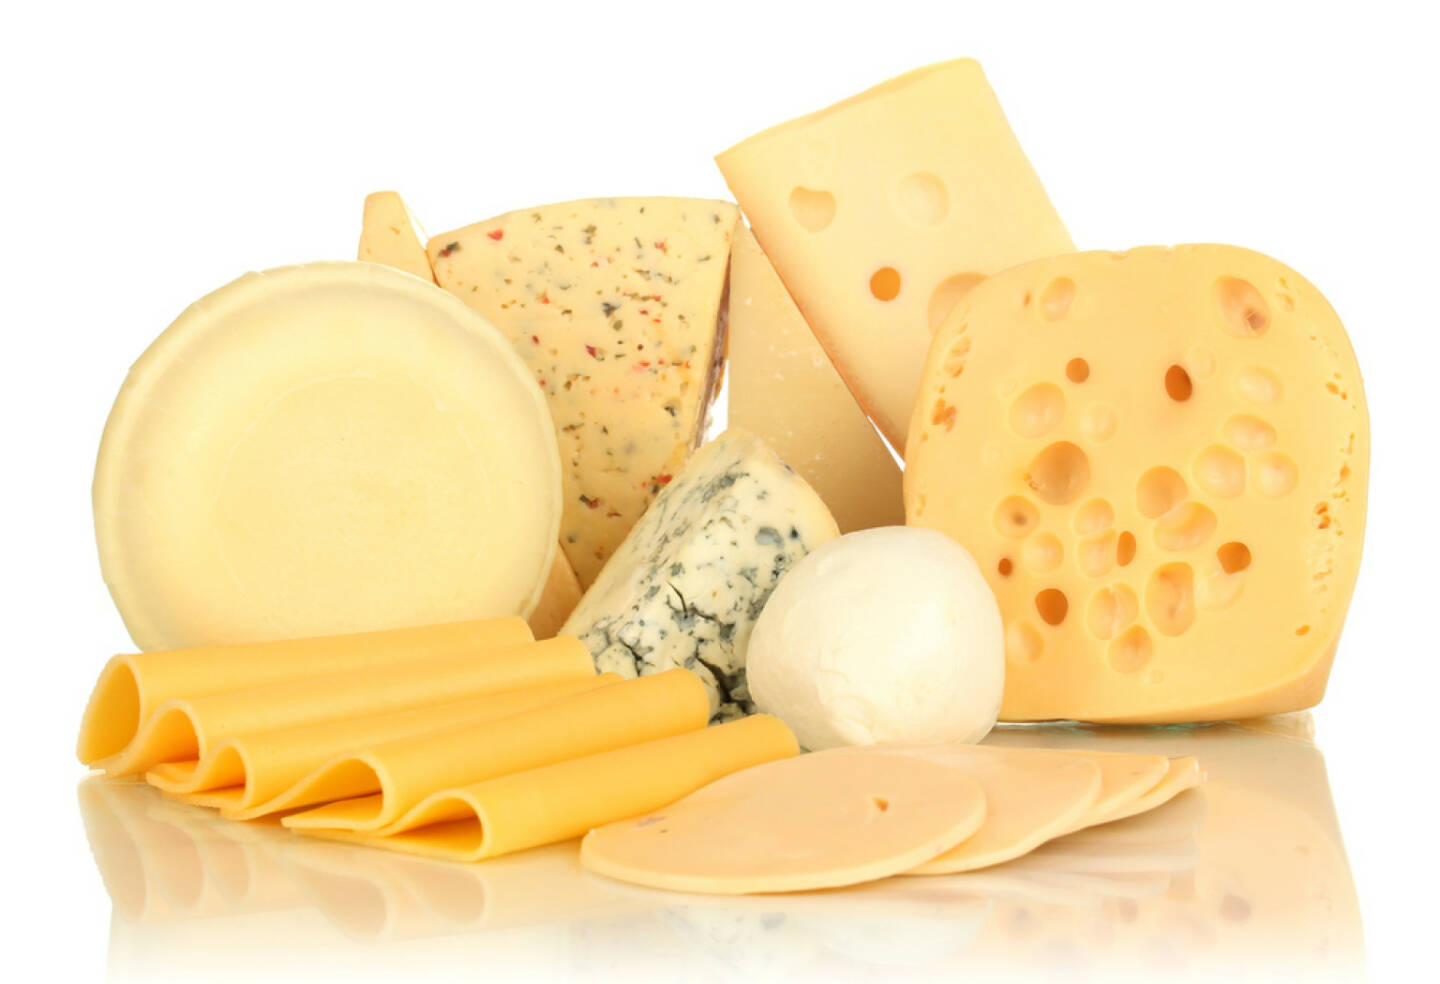 Käse, Milchprodukt, http://www.shutterstock.com/de/pic-123258430/stock-photo-various-types-of-cheese-isolated-on-white.html 